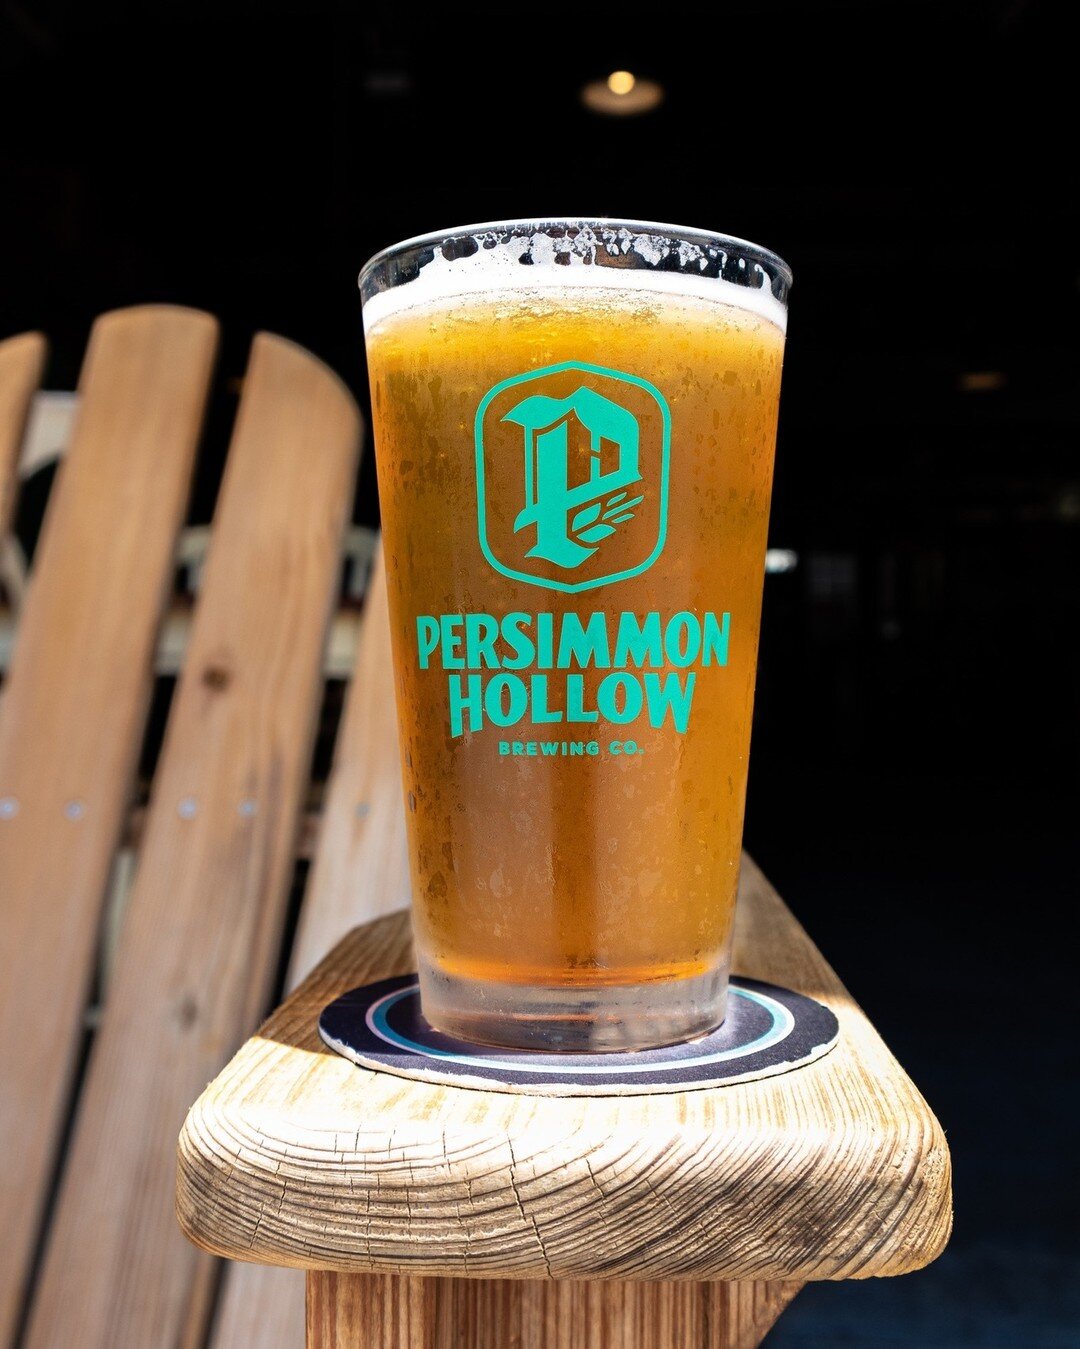 Didn&rsquo;t summer just go by like that 🫰

Persimmon Hollow Brewing Company&rsquo;s 'Summer Shortcake' will help it last just a little bit longer. Coming in at 4.6%, It's just about the perfect session blend for summer. With a slightly sweet, almos